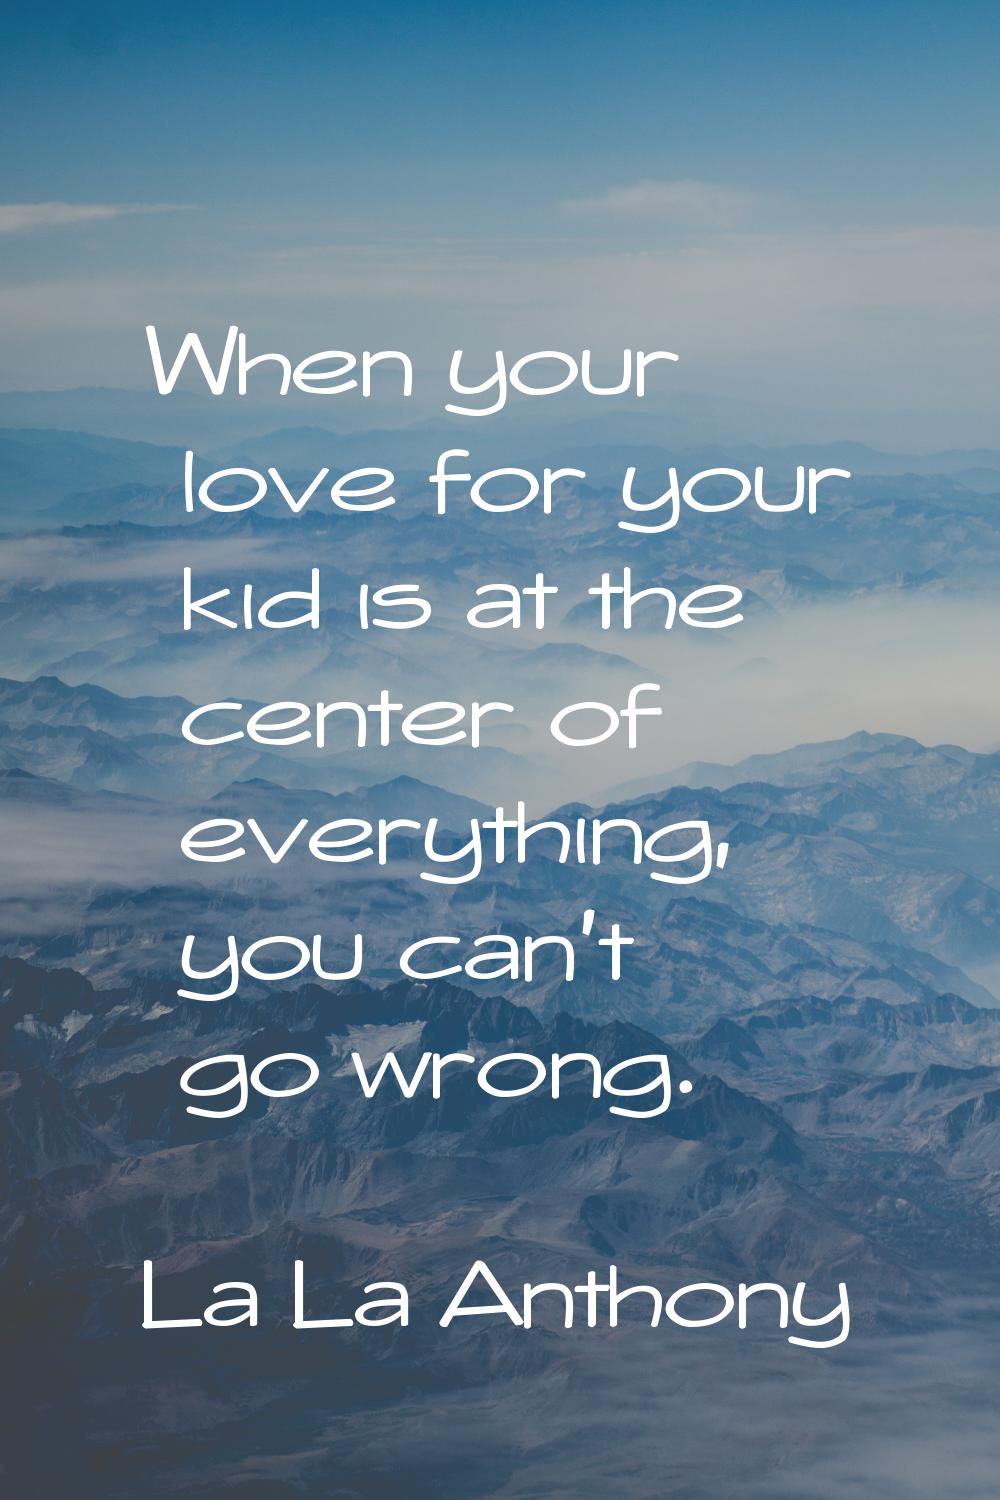 When your love for your kid is at the center of everything, you can't go wrong.